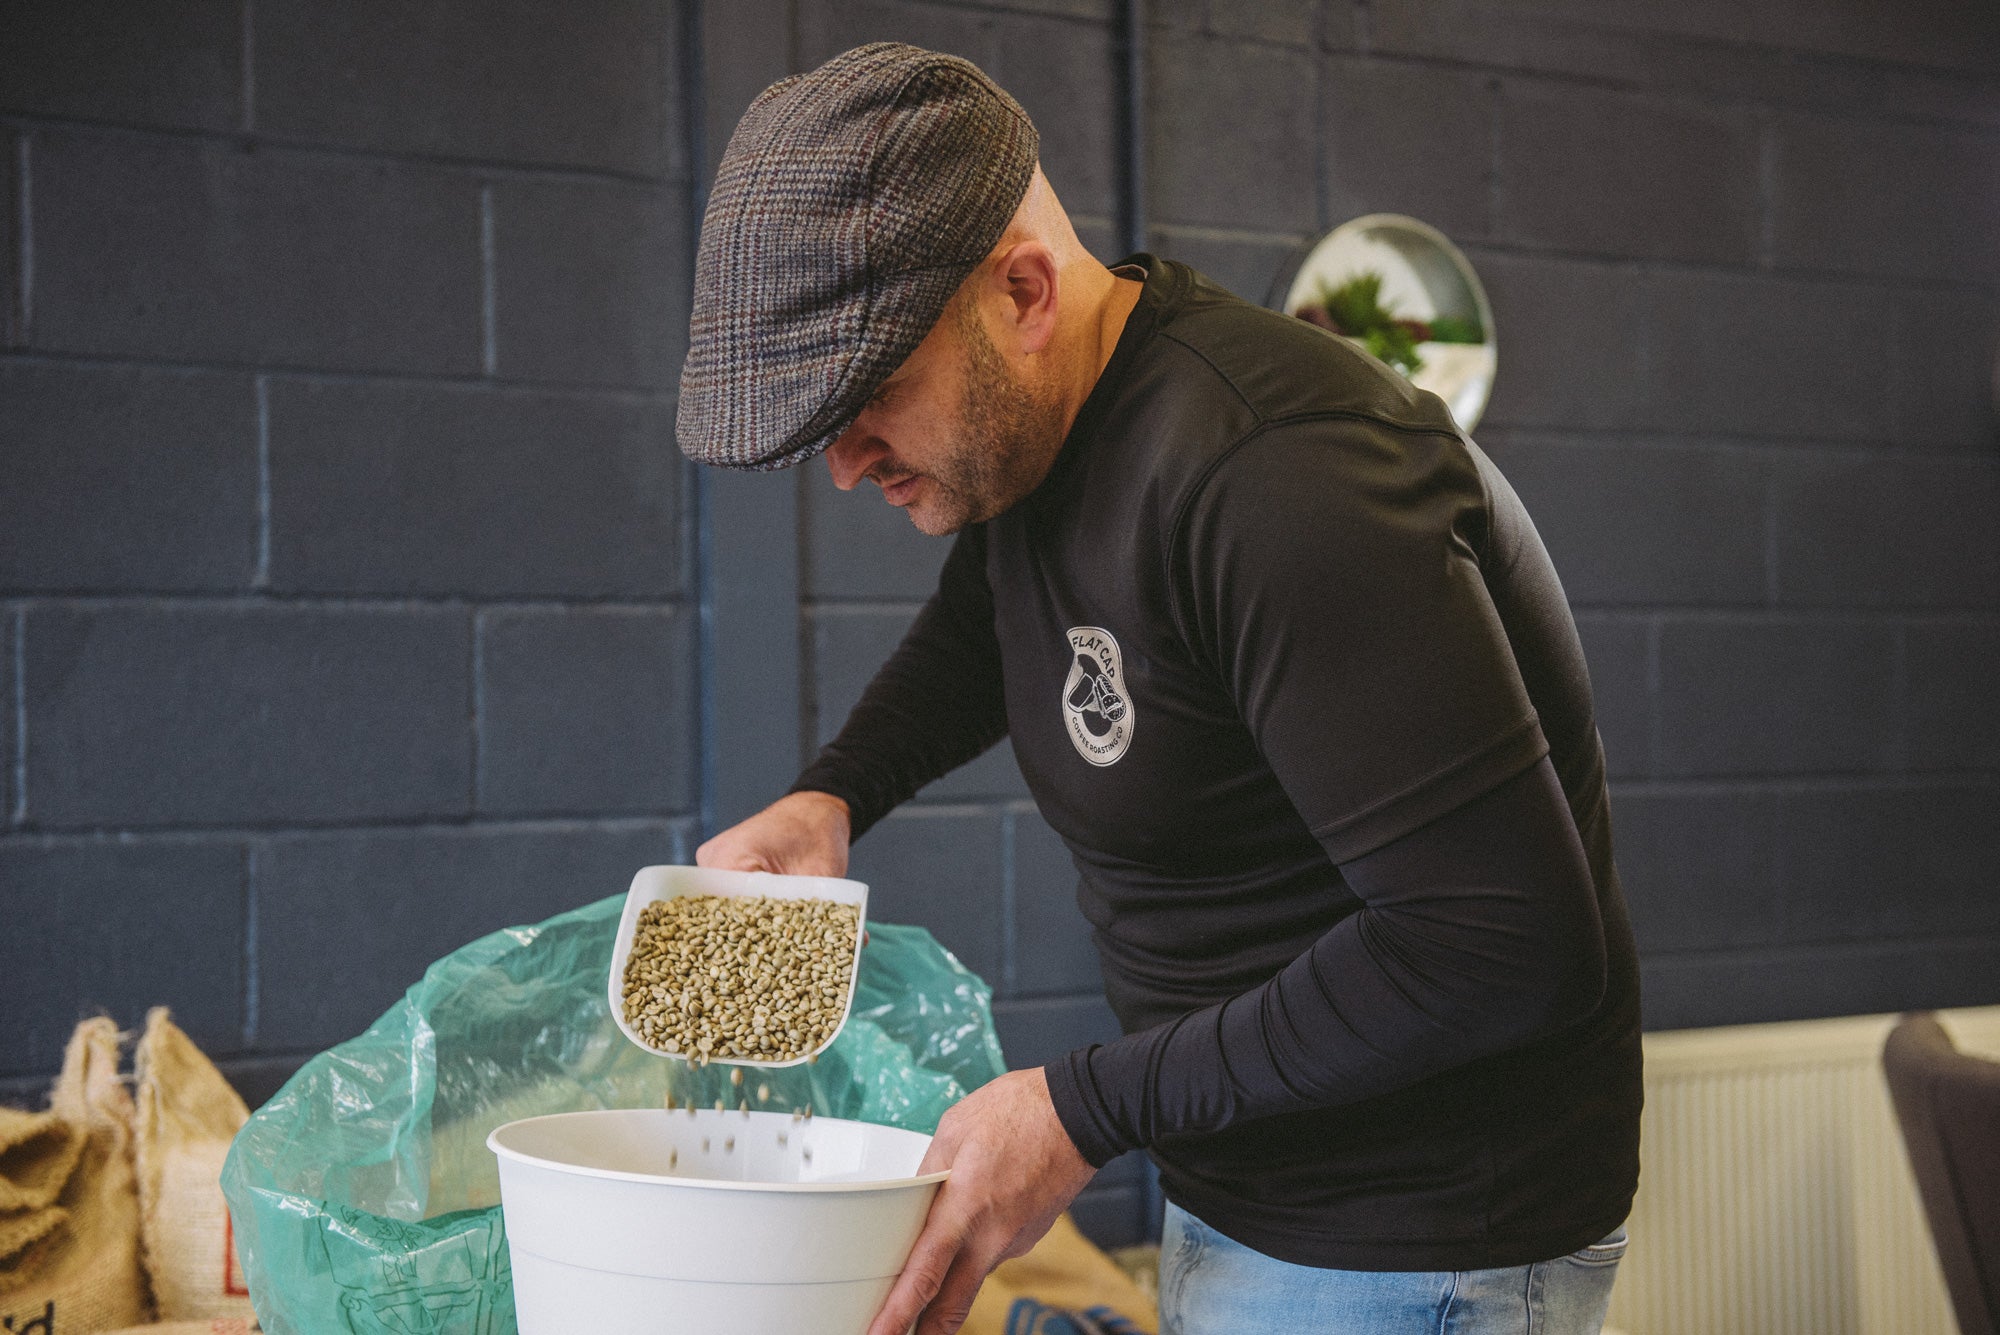 Mark of Flat Cap Coffee Roasting Co. pouring coffee beans into a drum